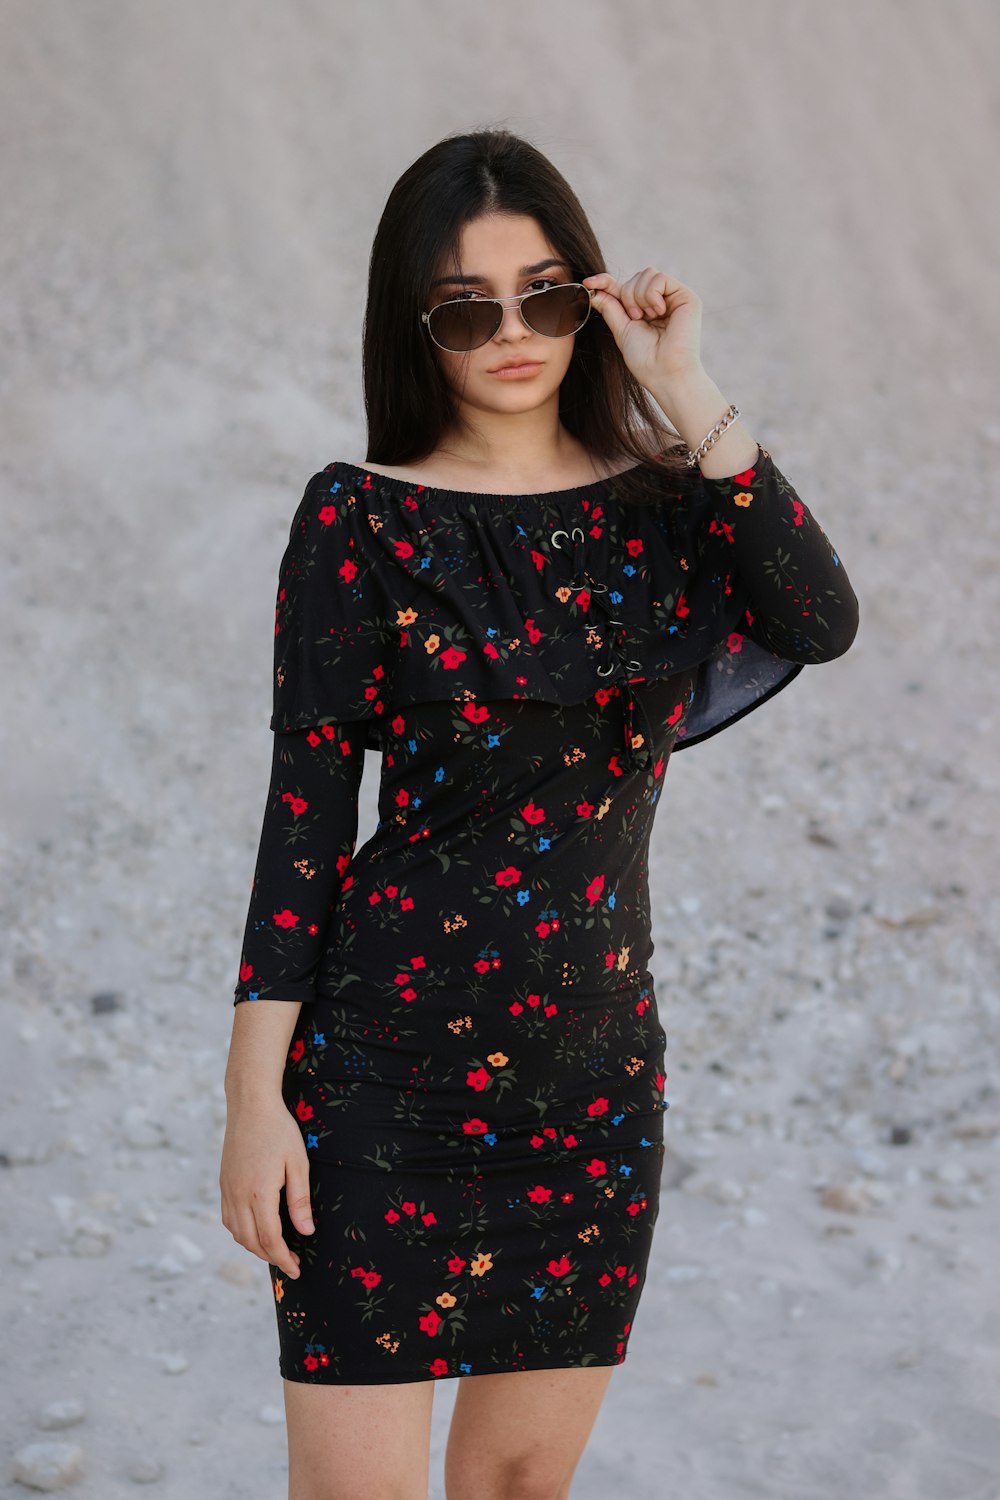 a woman in a black dress and sunglasses